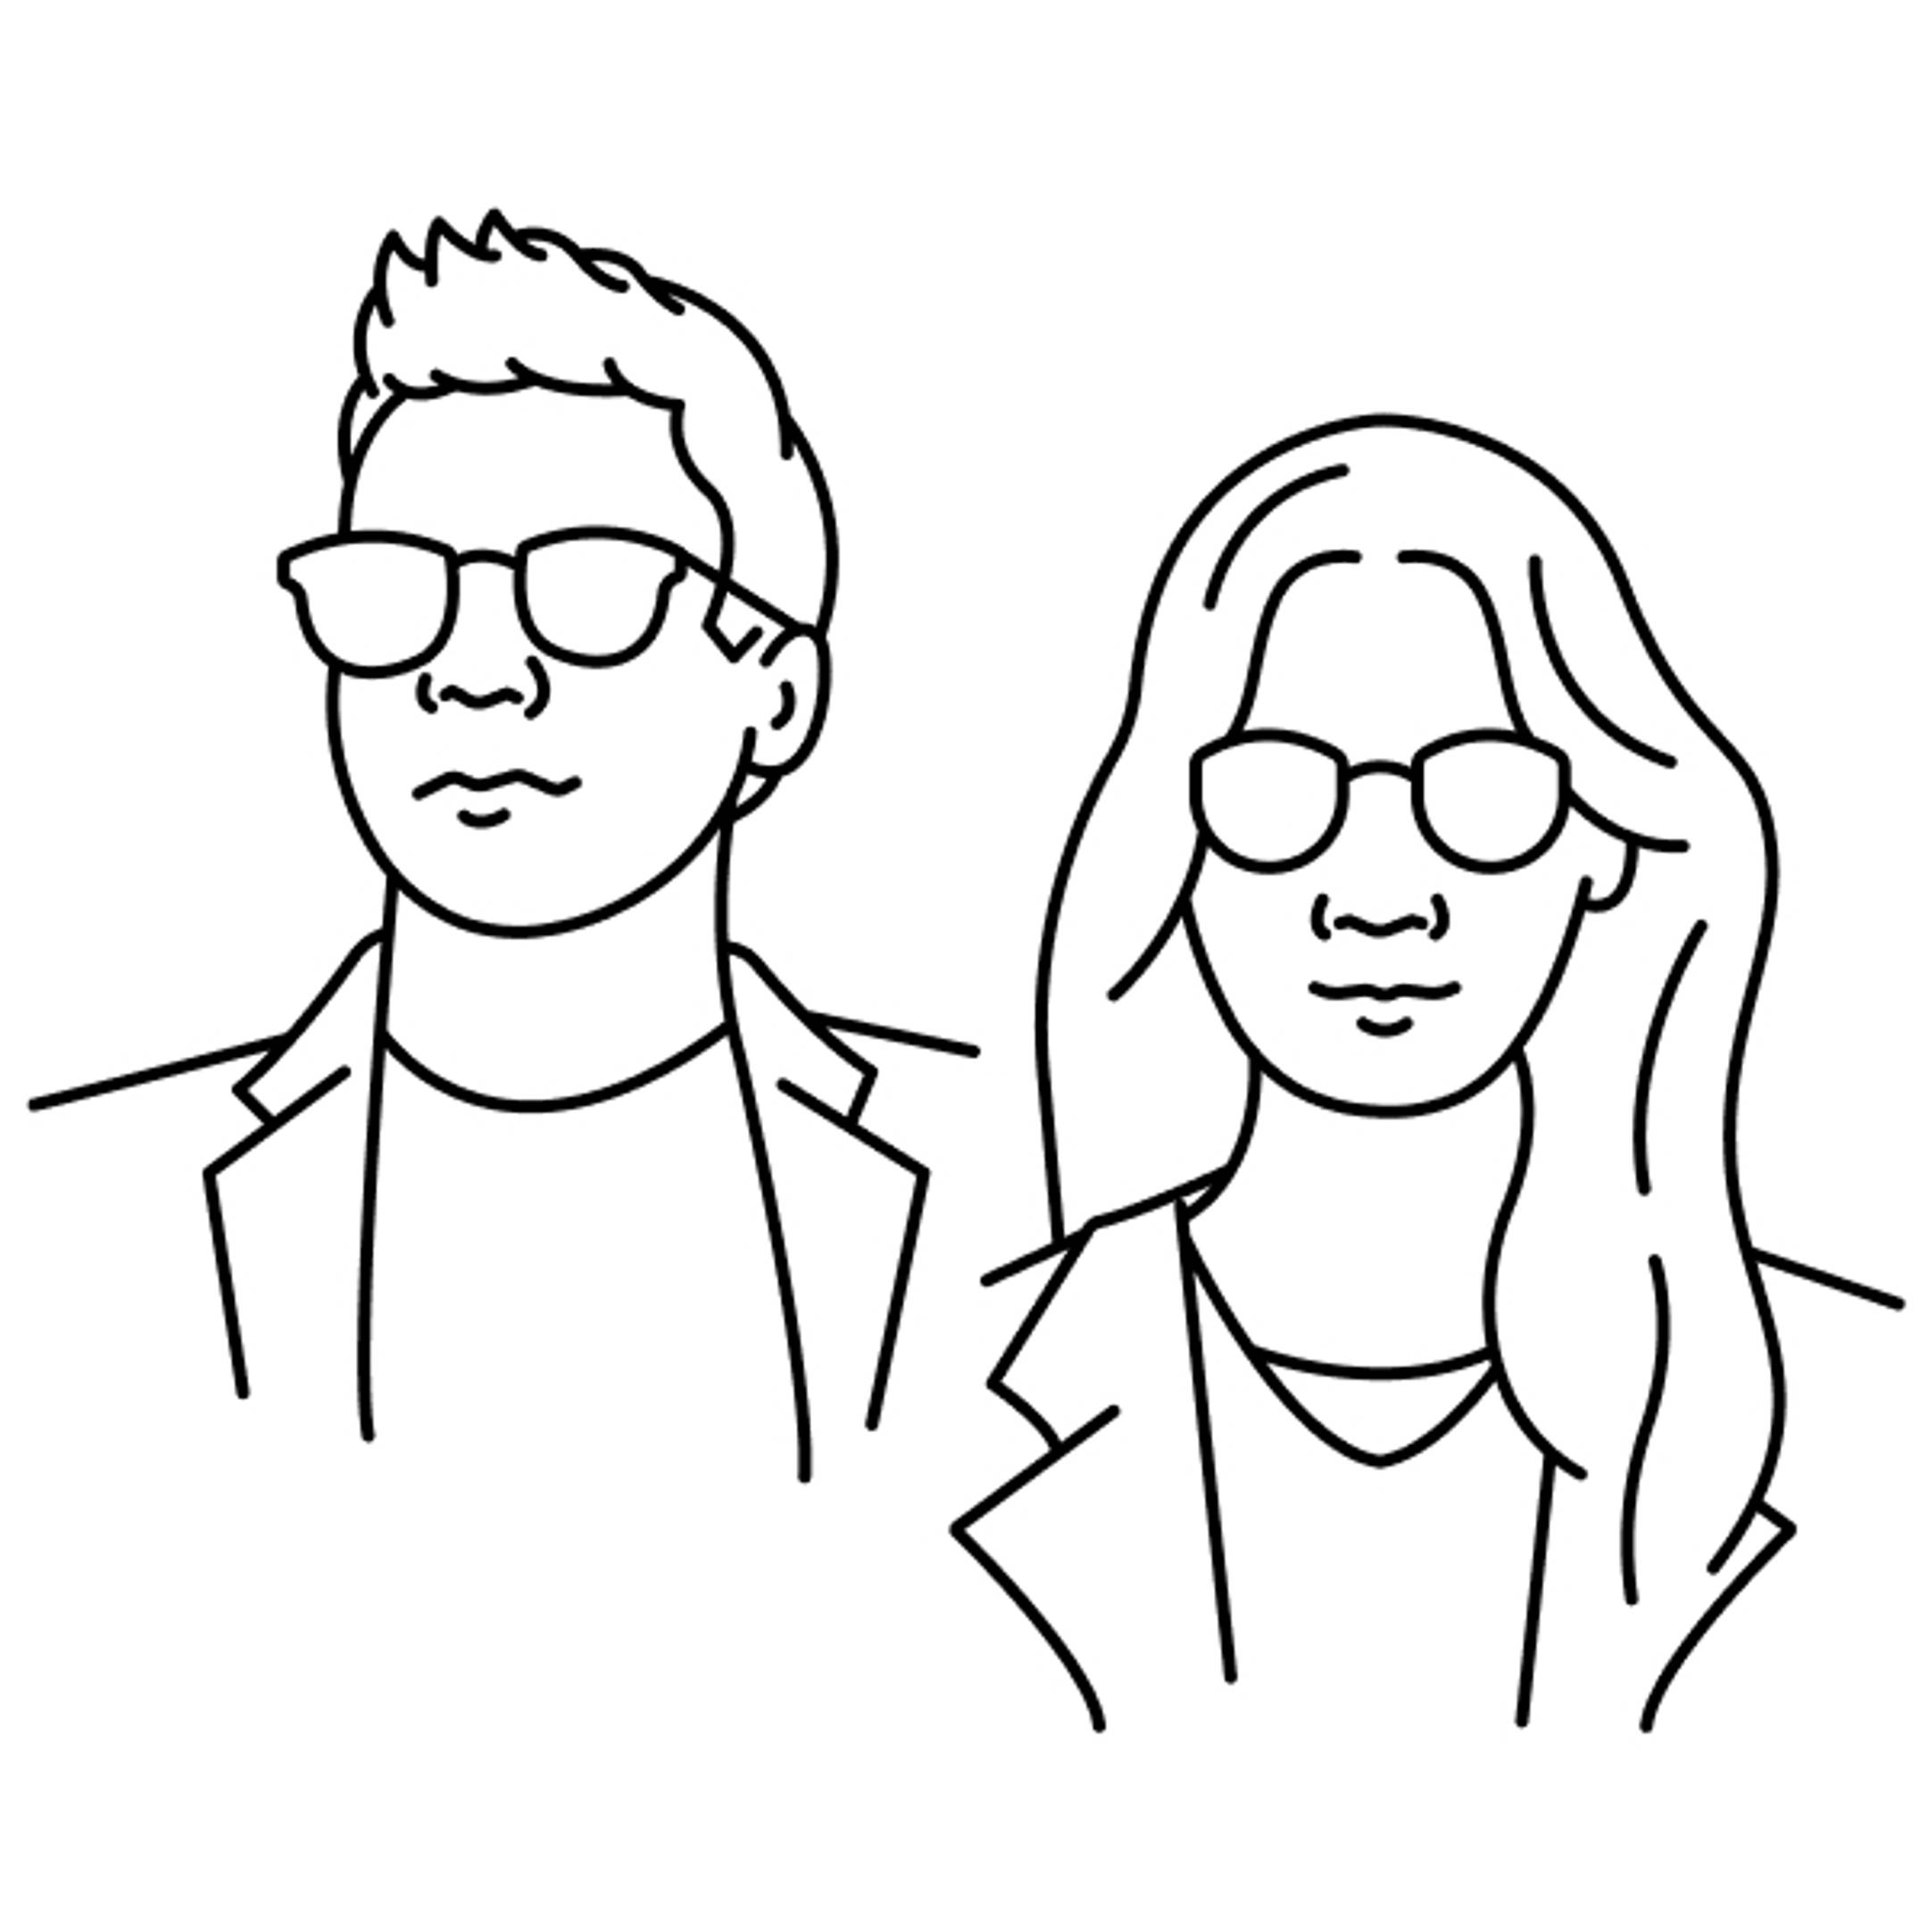 Animated drawing of male and female opticians